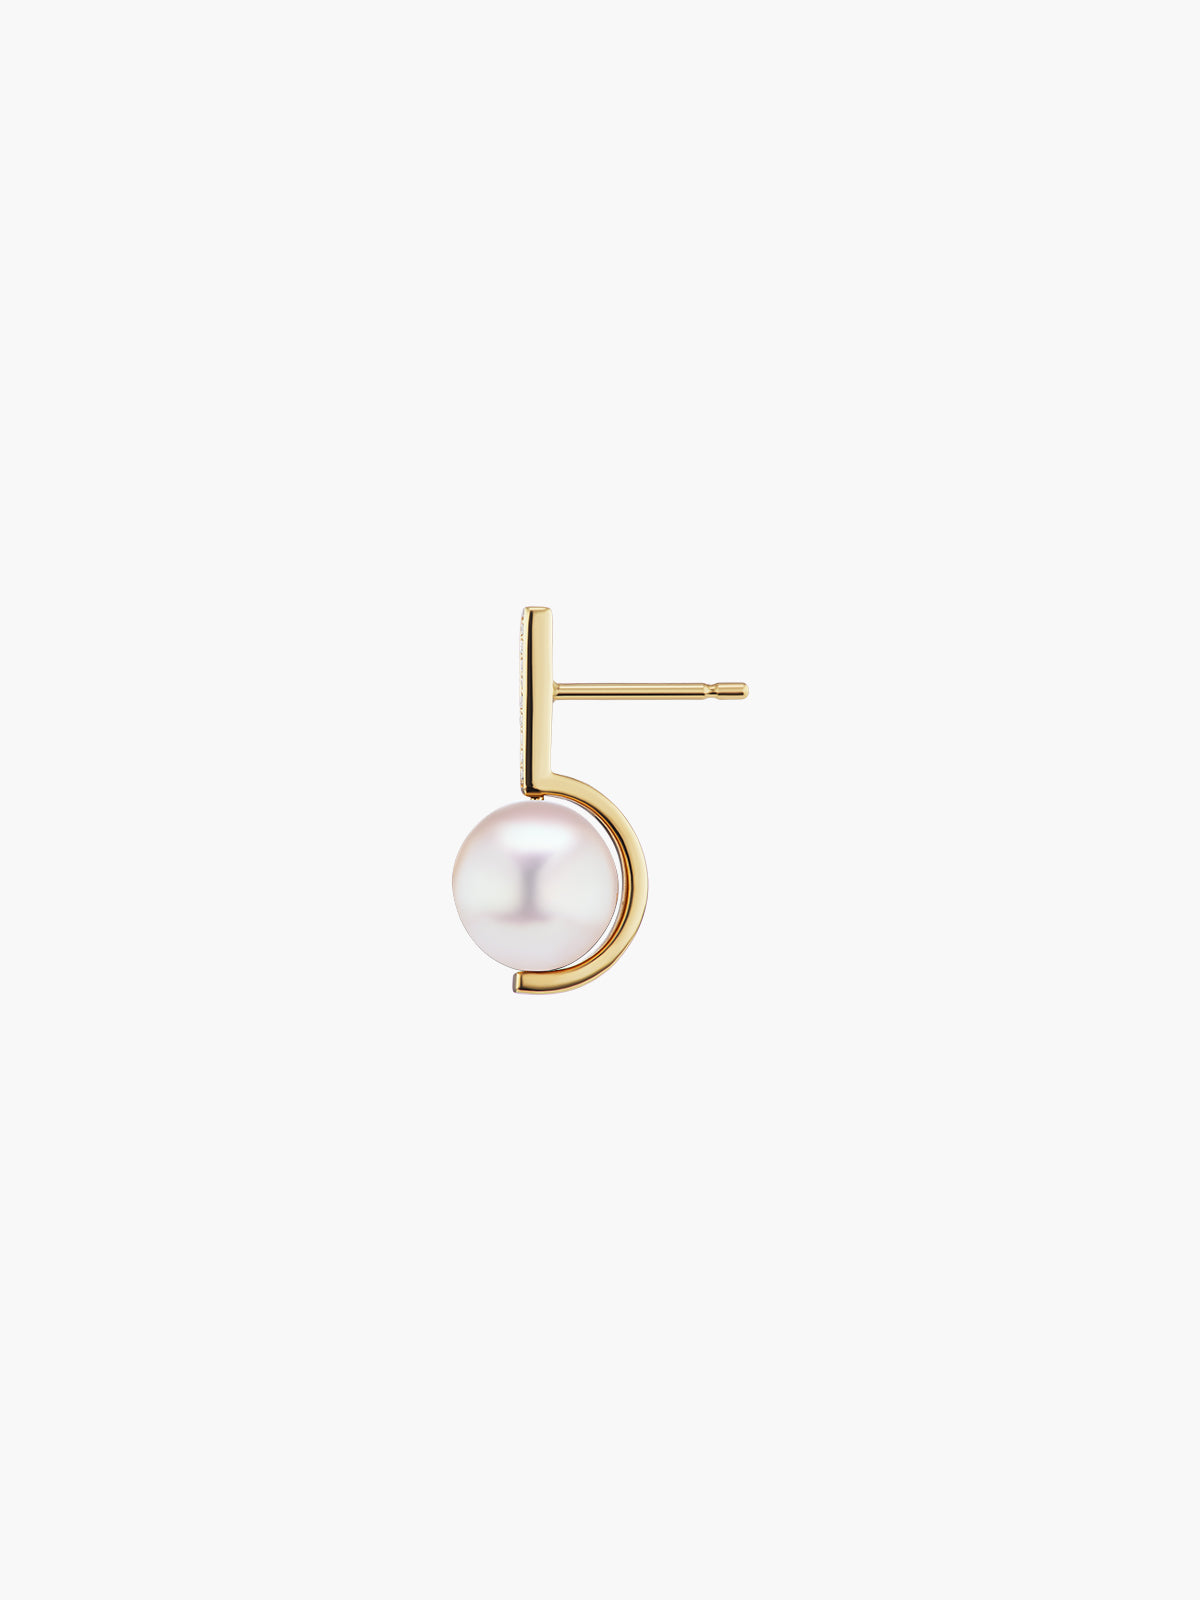 Exclusive Pearl Drop Earring Exclusive Pearl Drop Earring - Fashionkind